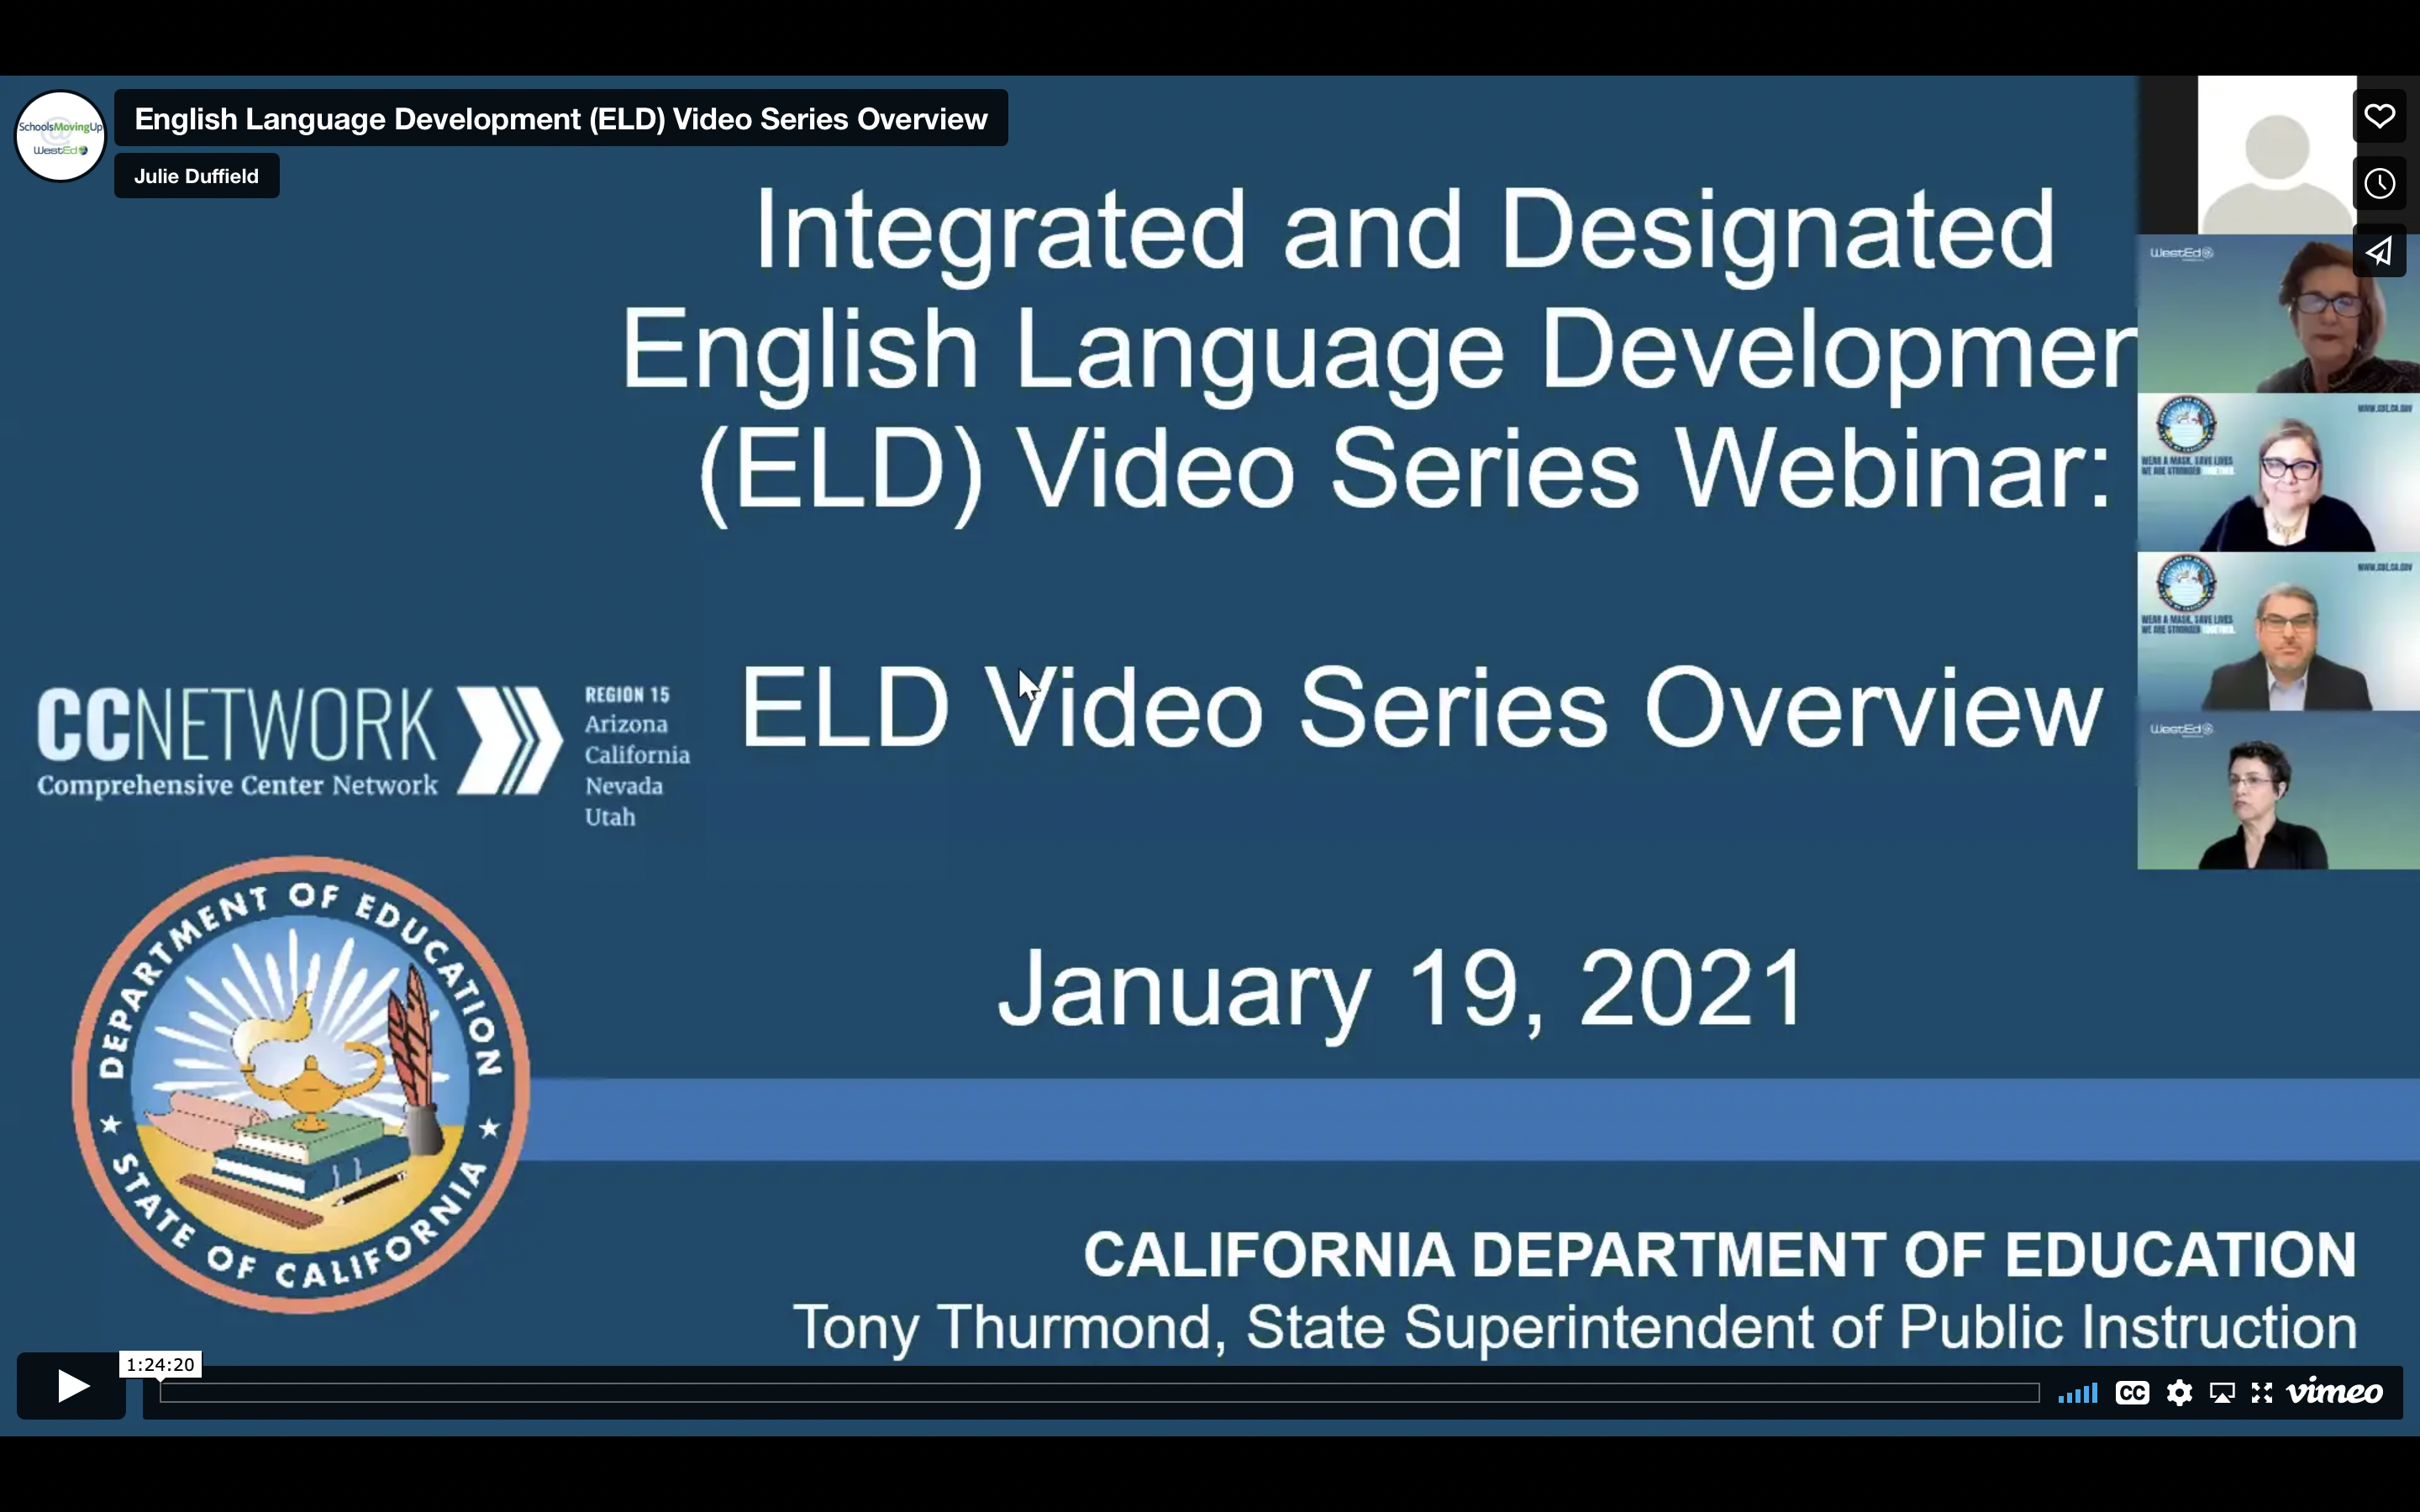 Webinar Series on the CDE Integrated and Designated English Language Development Video Series